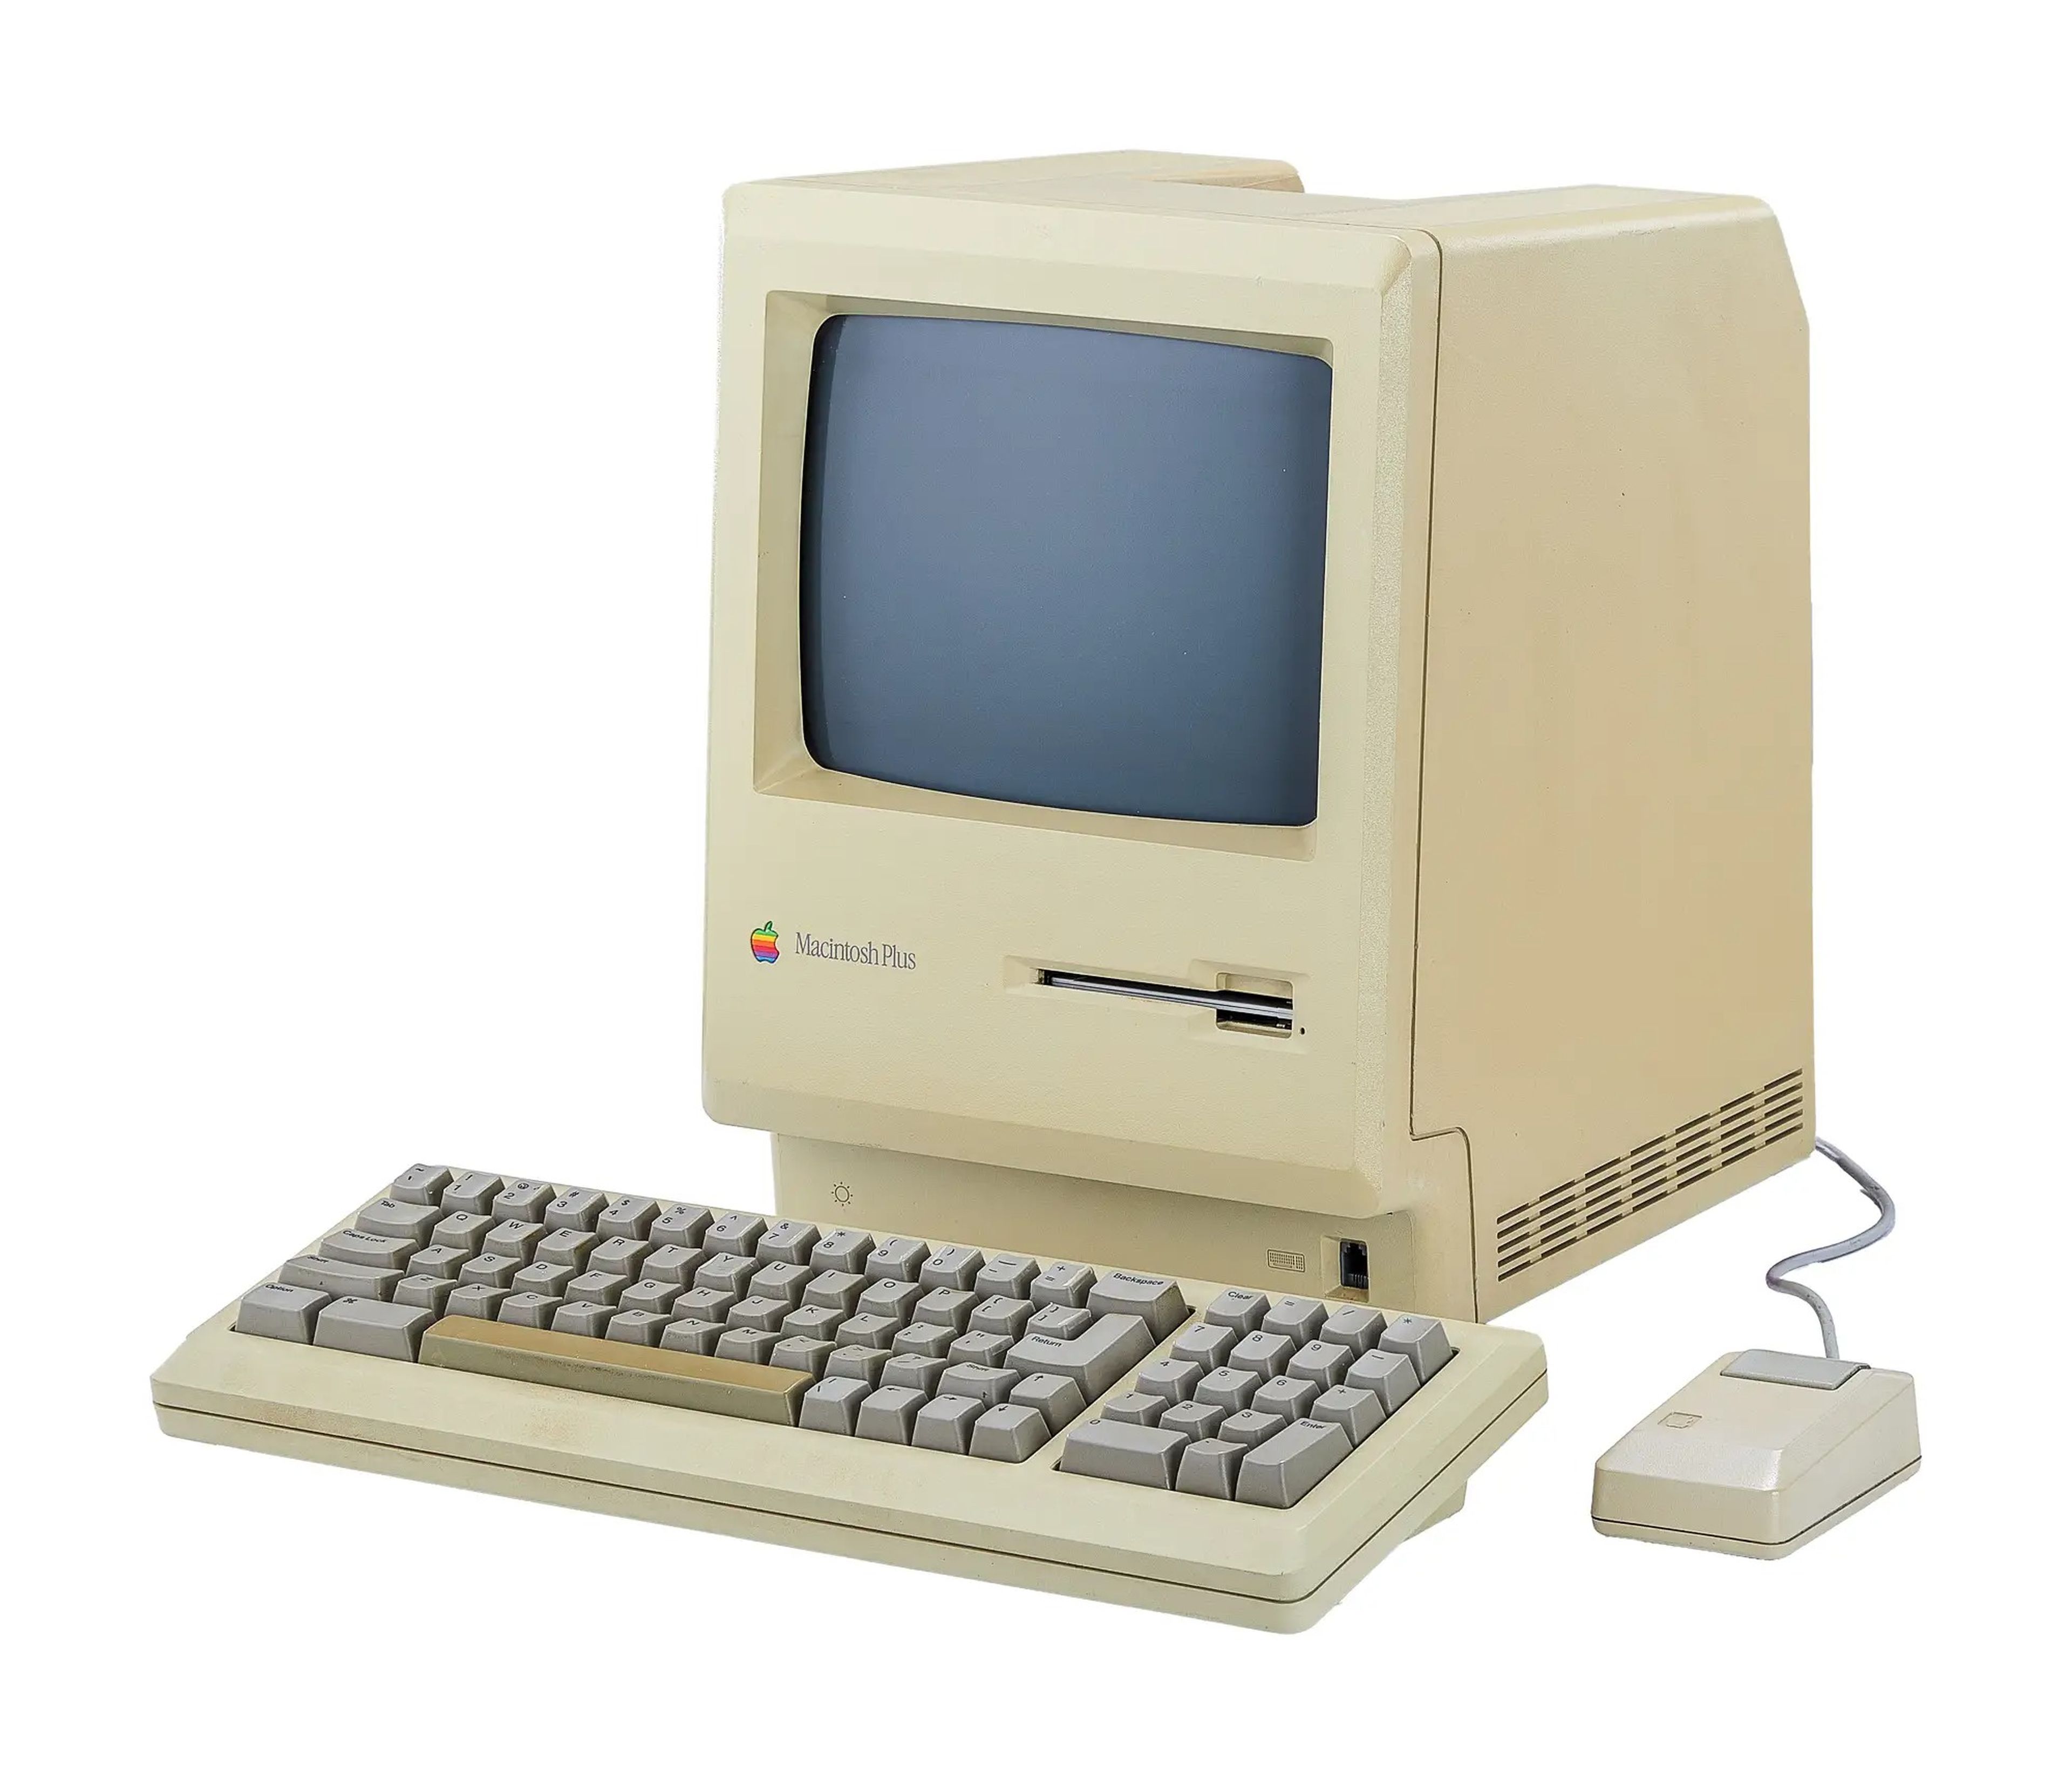 1986 Apple Macintosh Plus computer including a keyboard and mouse